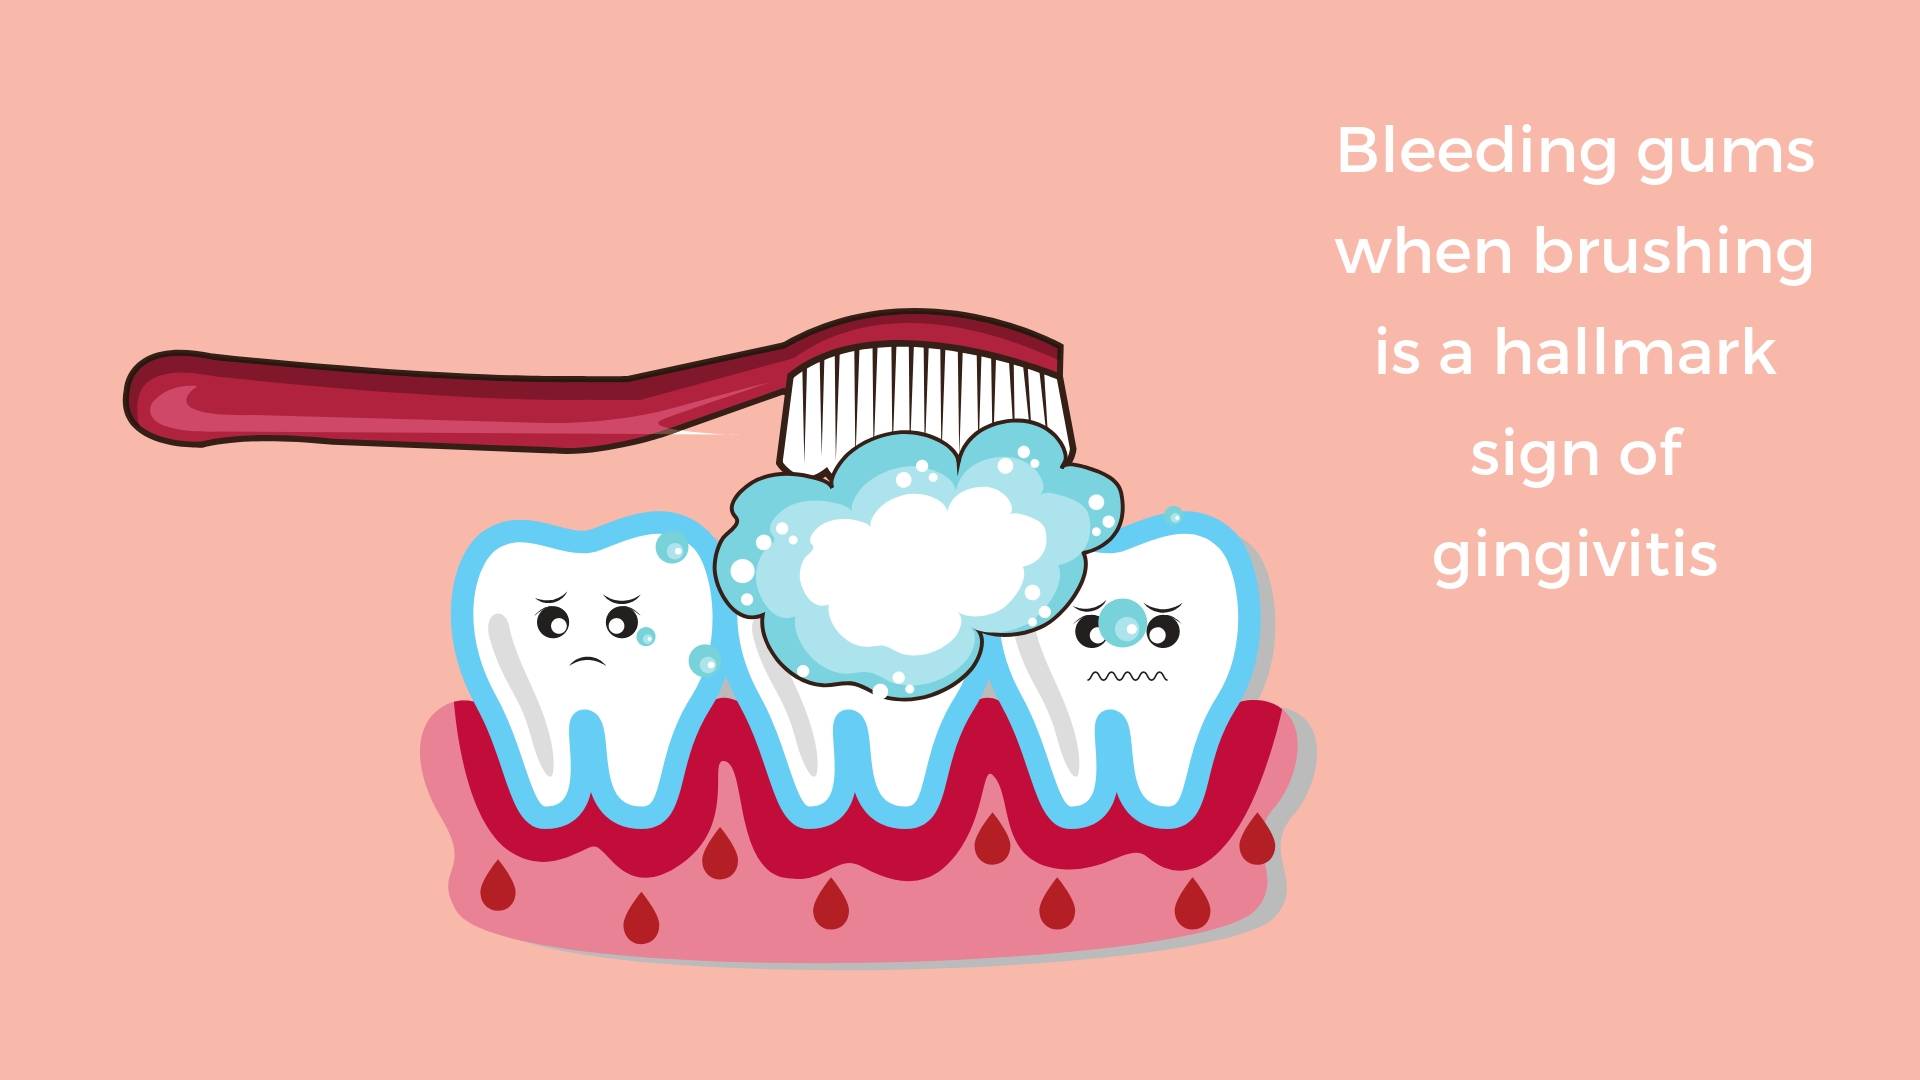 Bleeding gums during toothbrushing is a sign of gingivitis